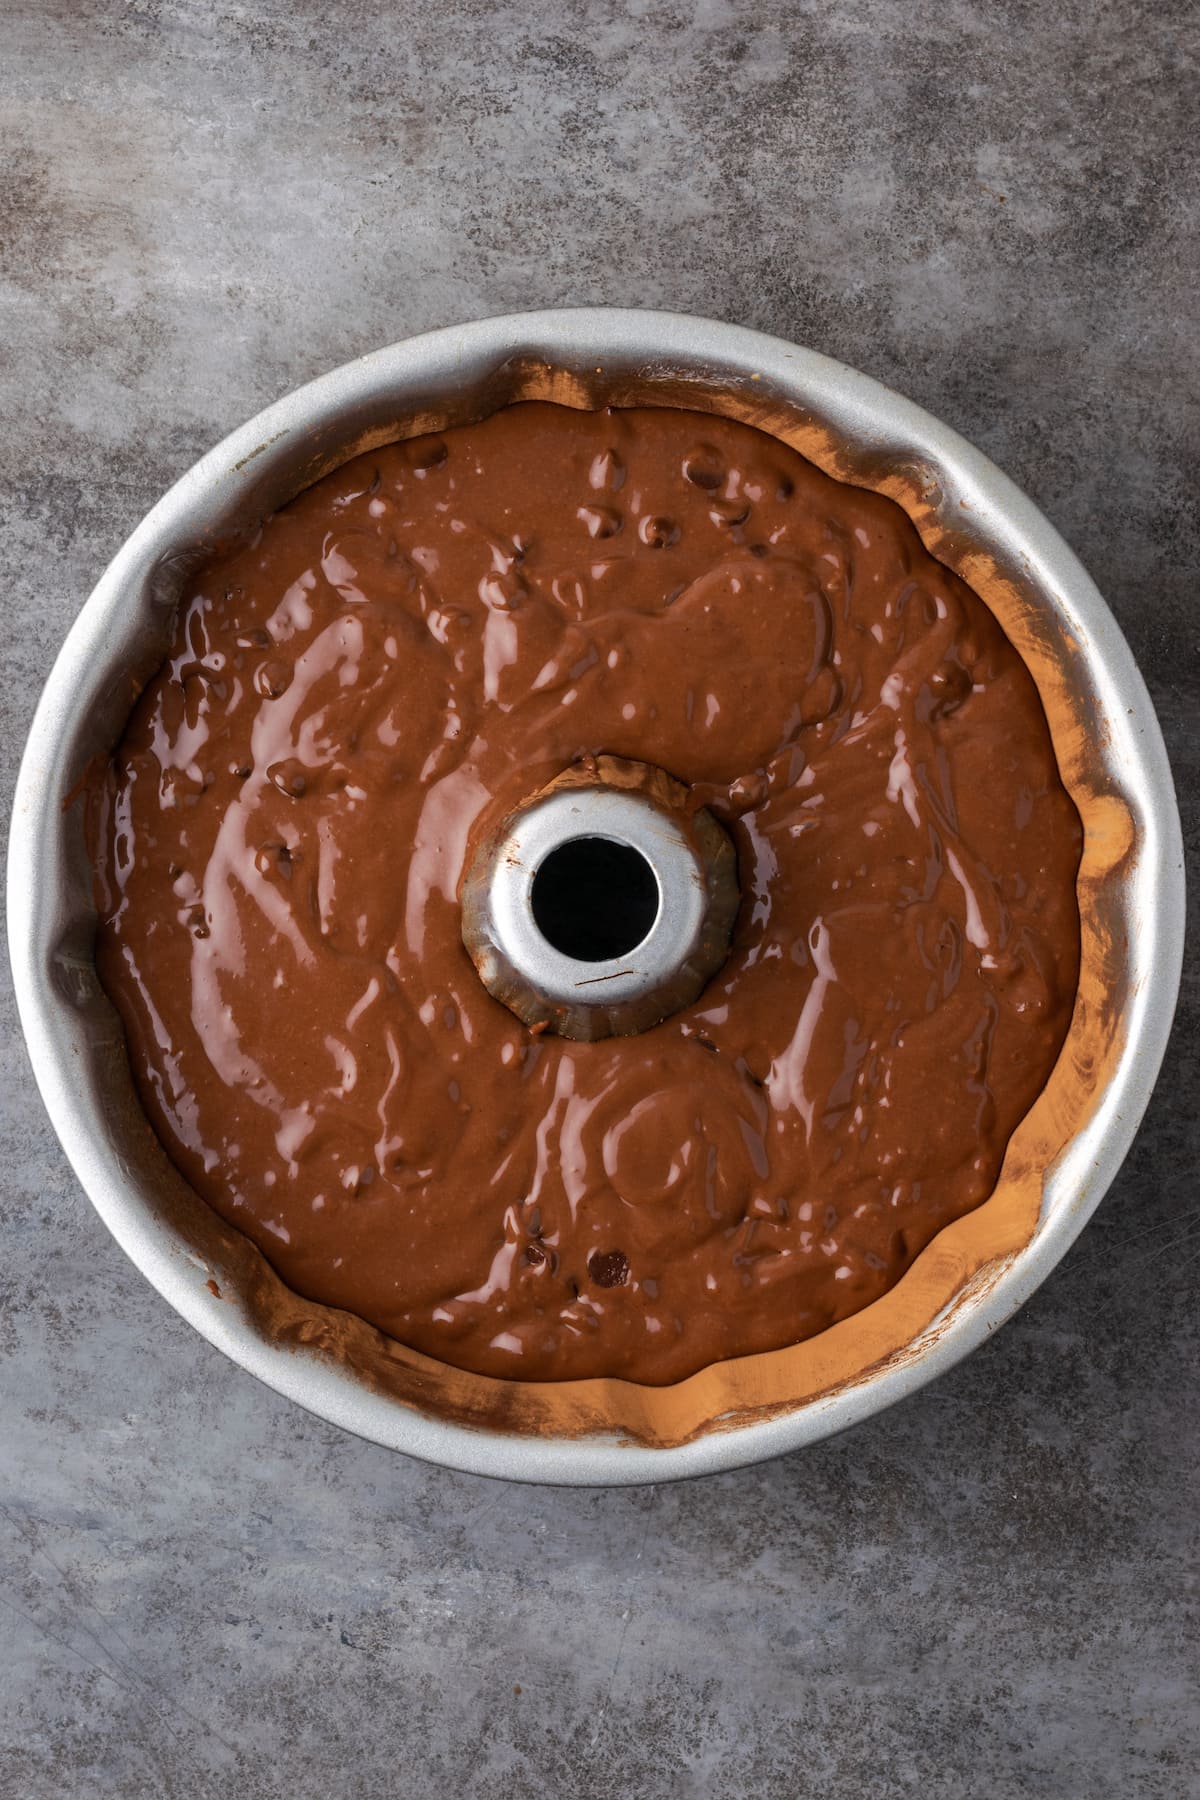 Chocolate cake batter in a 10-inch bundt pan.